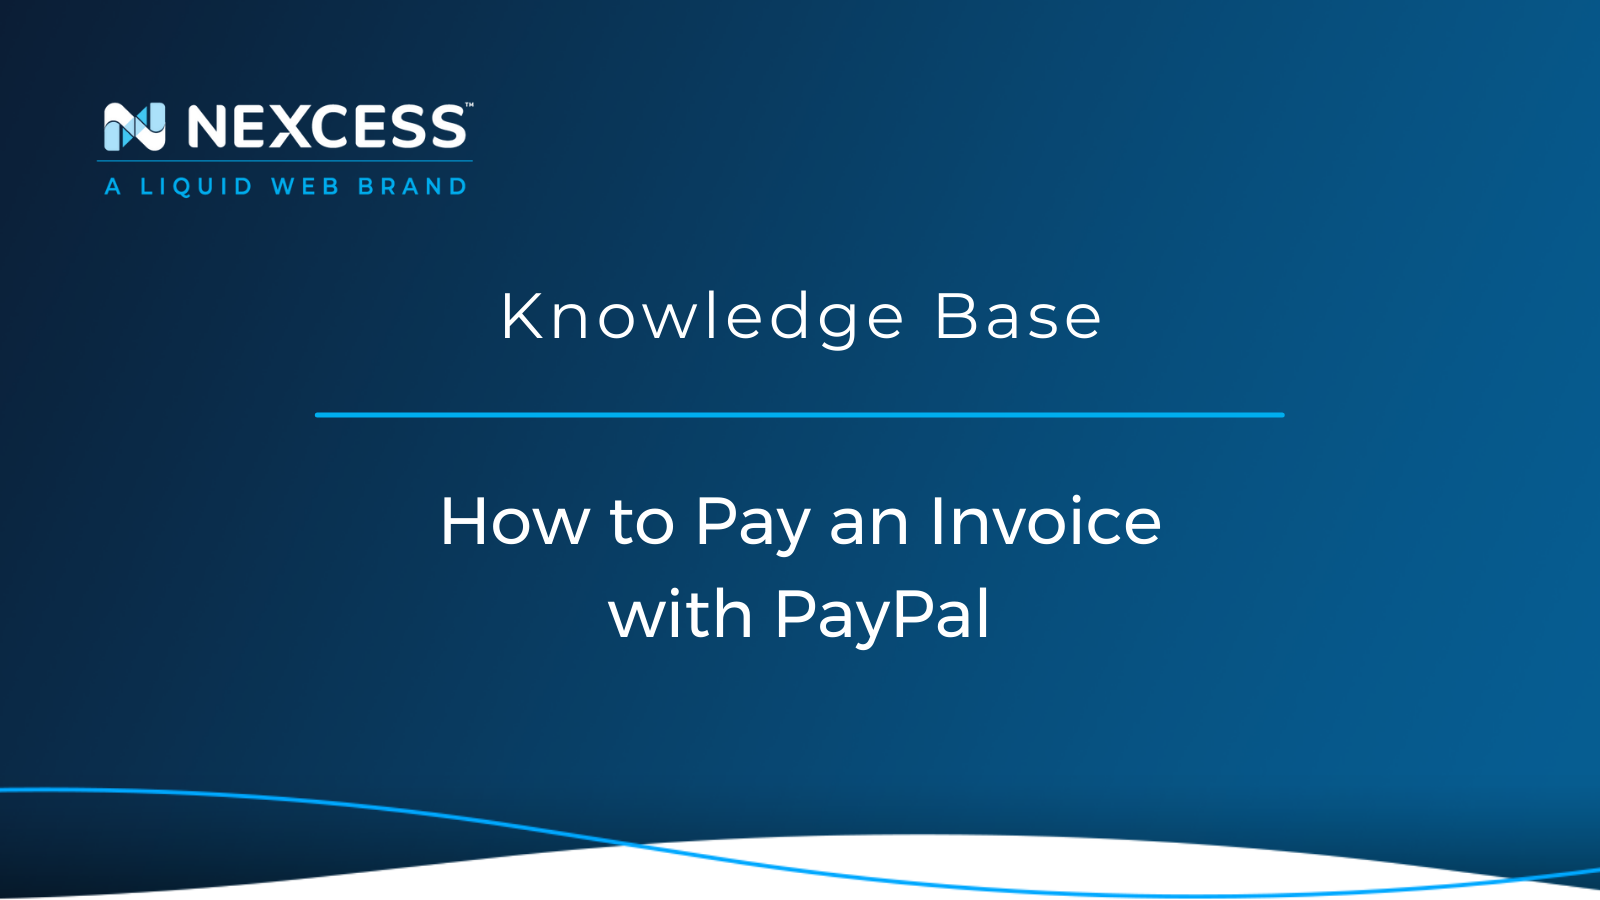 How to Pay an Invoice with PayPal